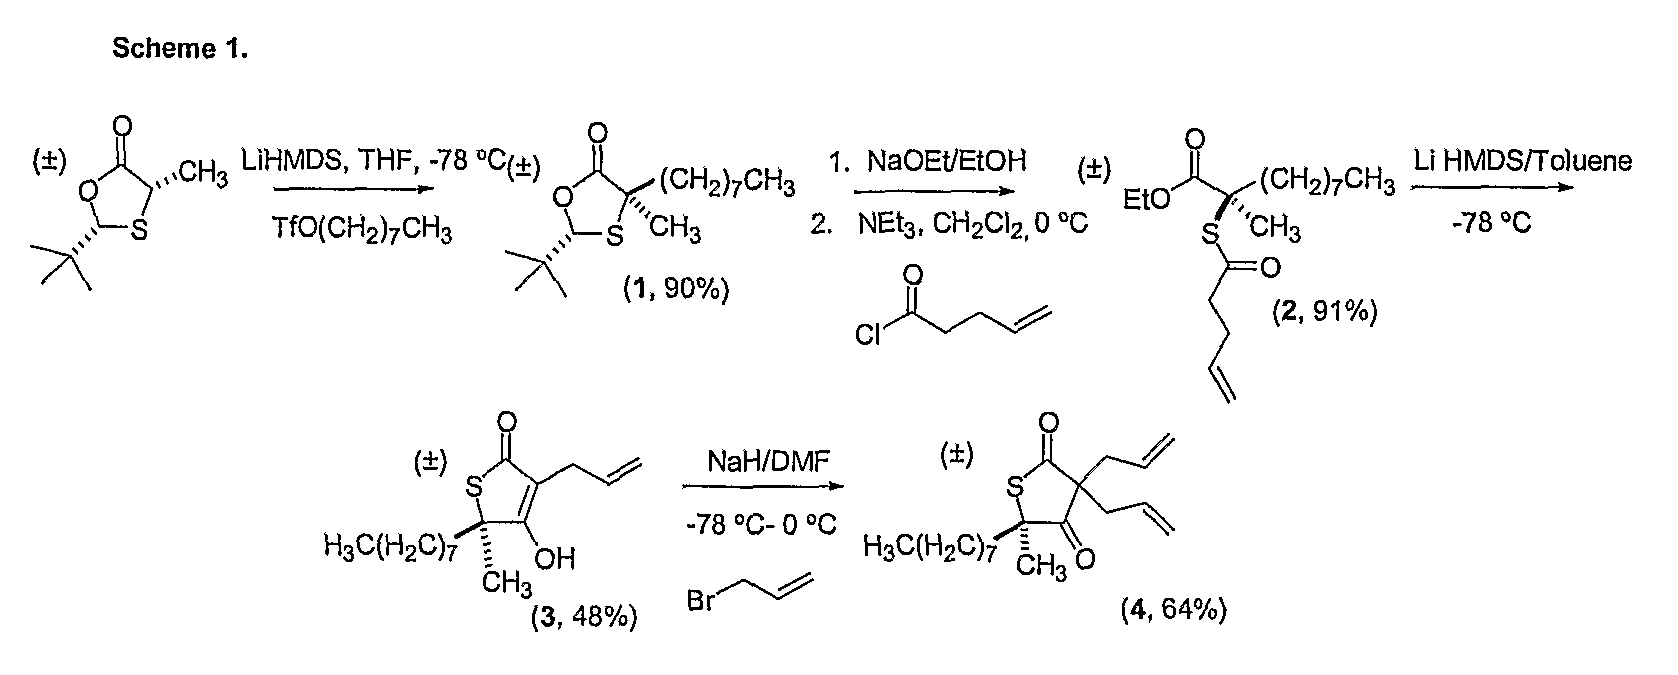 Novel Compounds, Pharmaceutical Compositions Containing Same, and Methods of Use for Same